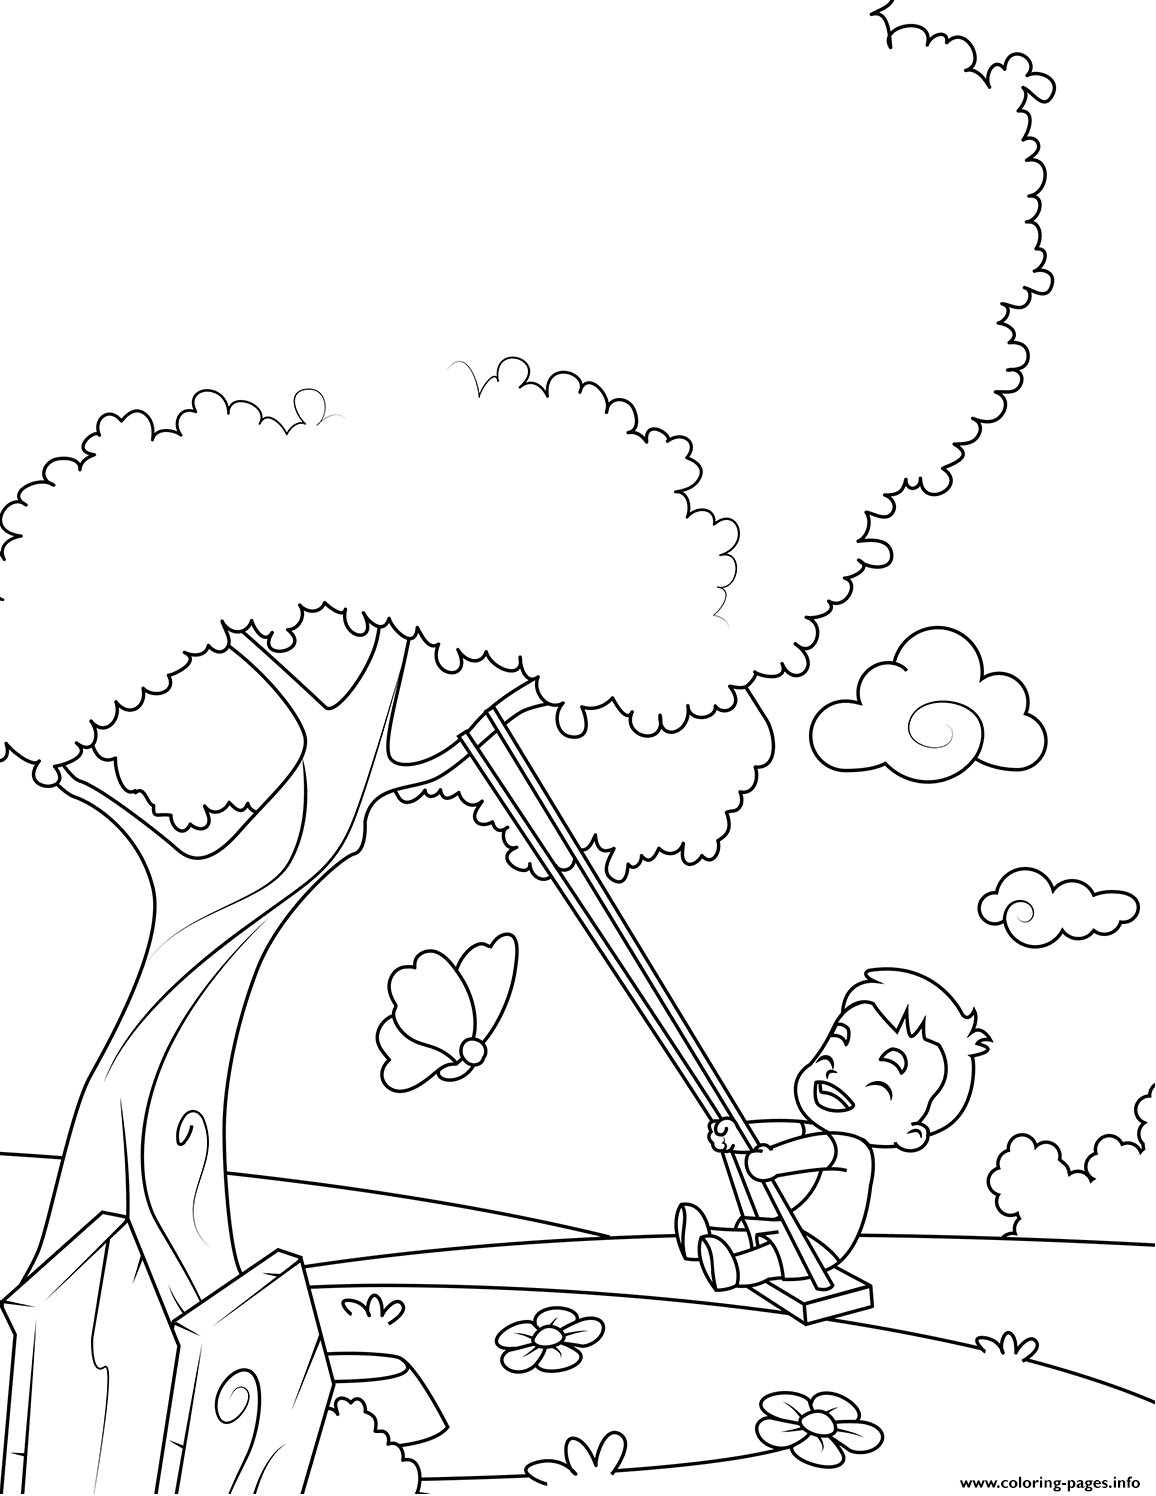 Boy On A Swing coloring